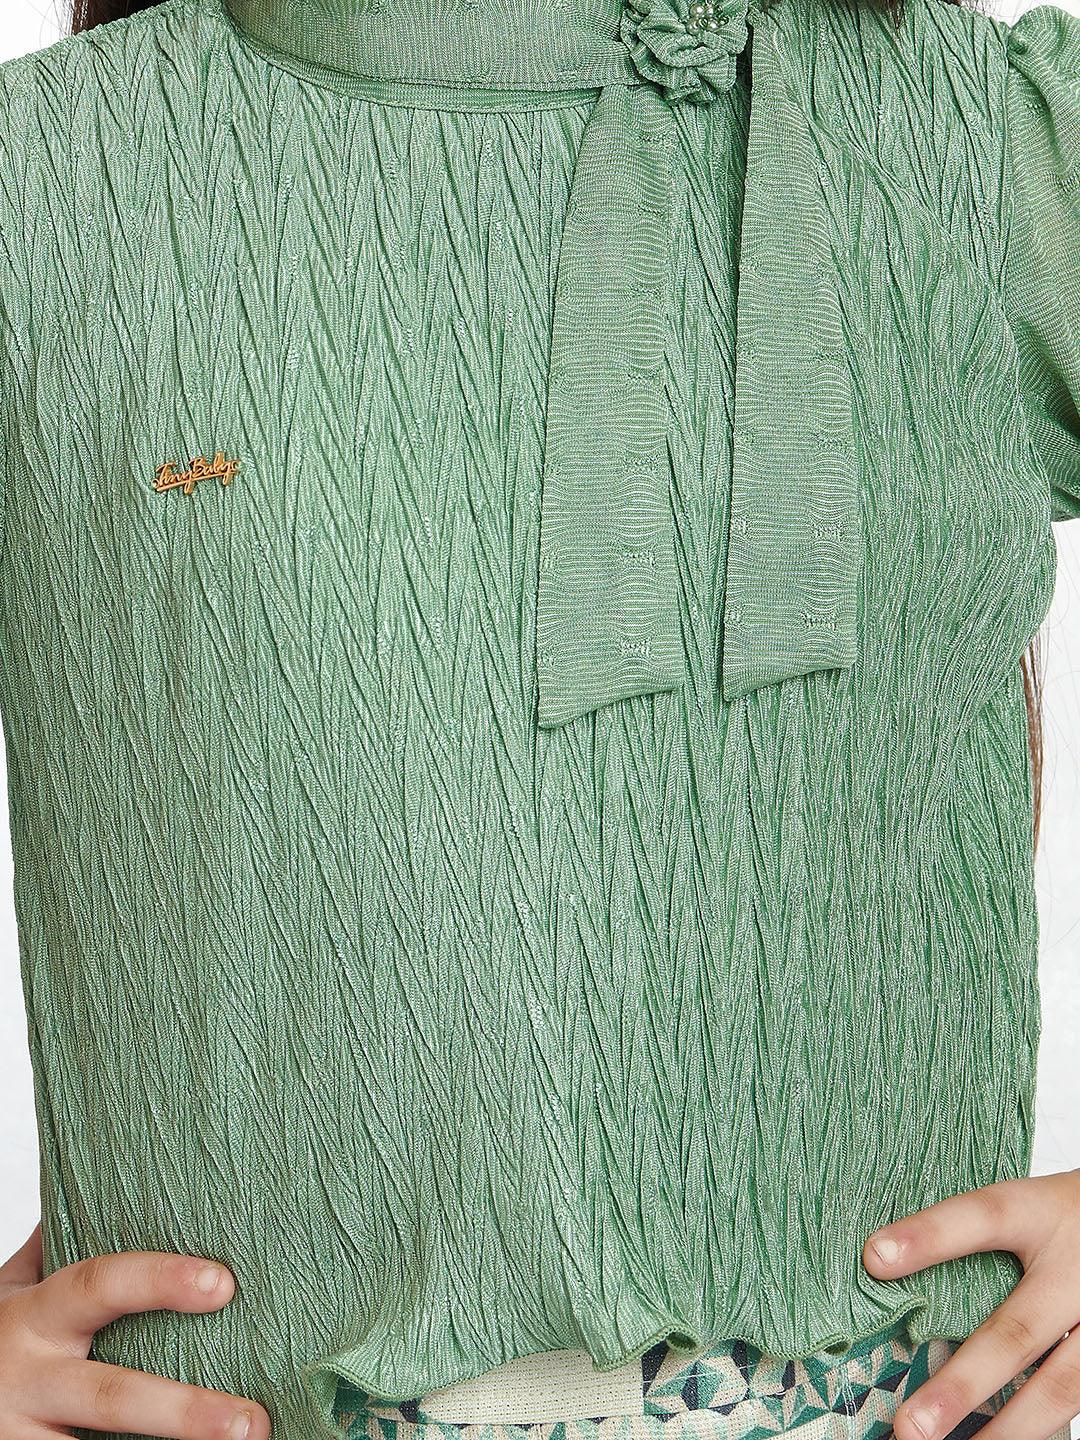 Tiny Baby Green Colored Skirt Top Set - 2122 Green - TINY BABY INDIA shop.tinybaby.in